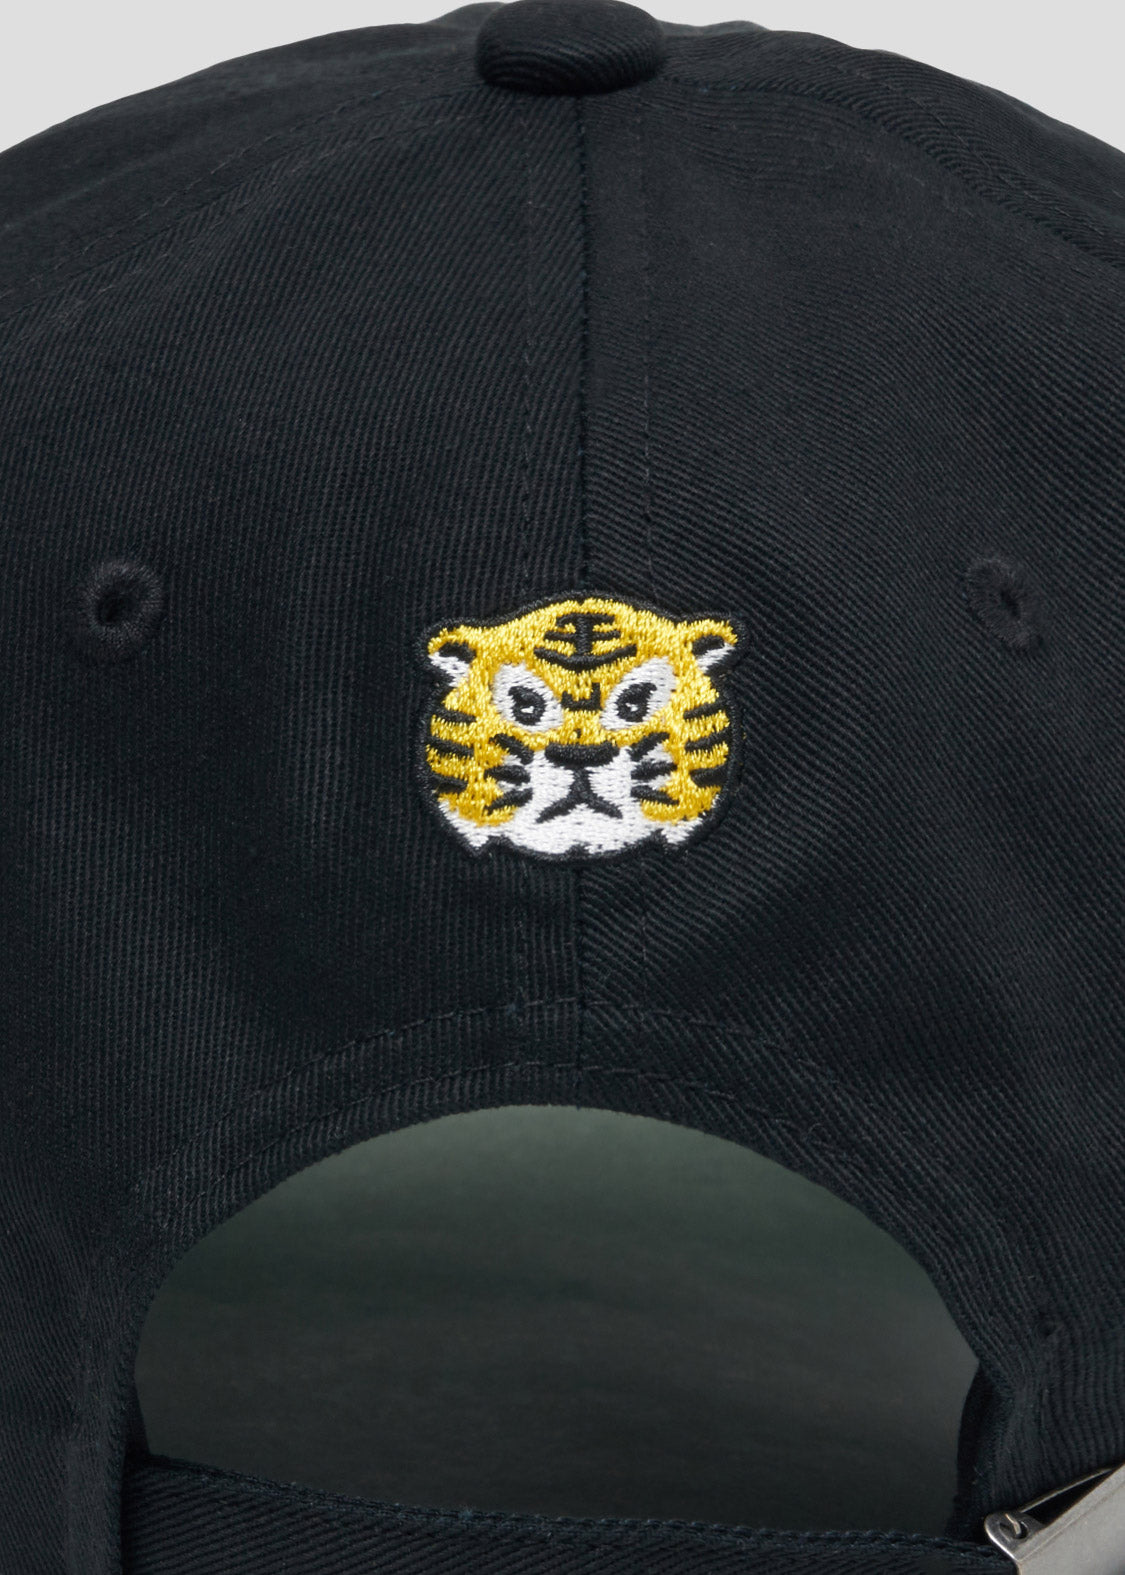 Cap (Tiger Embroidery)